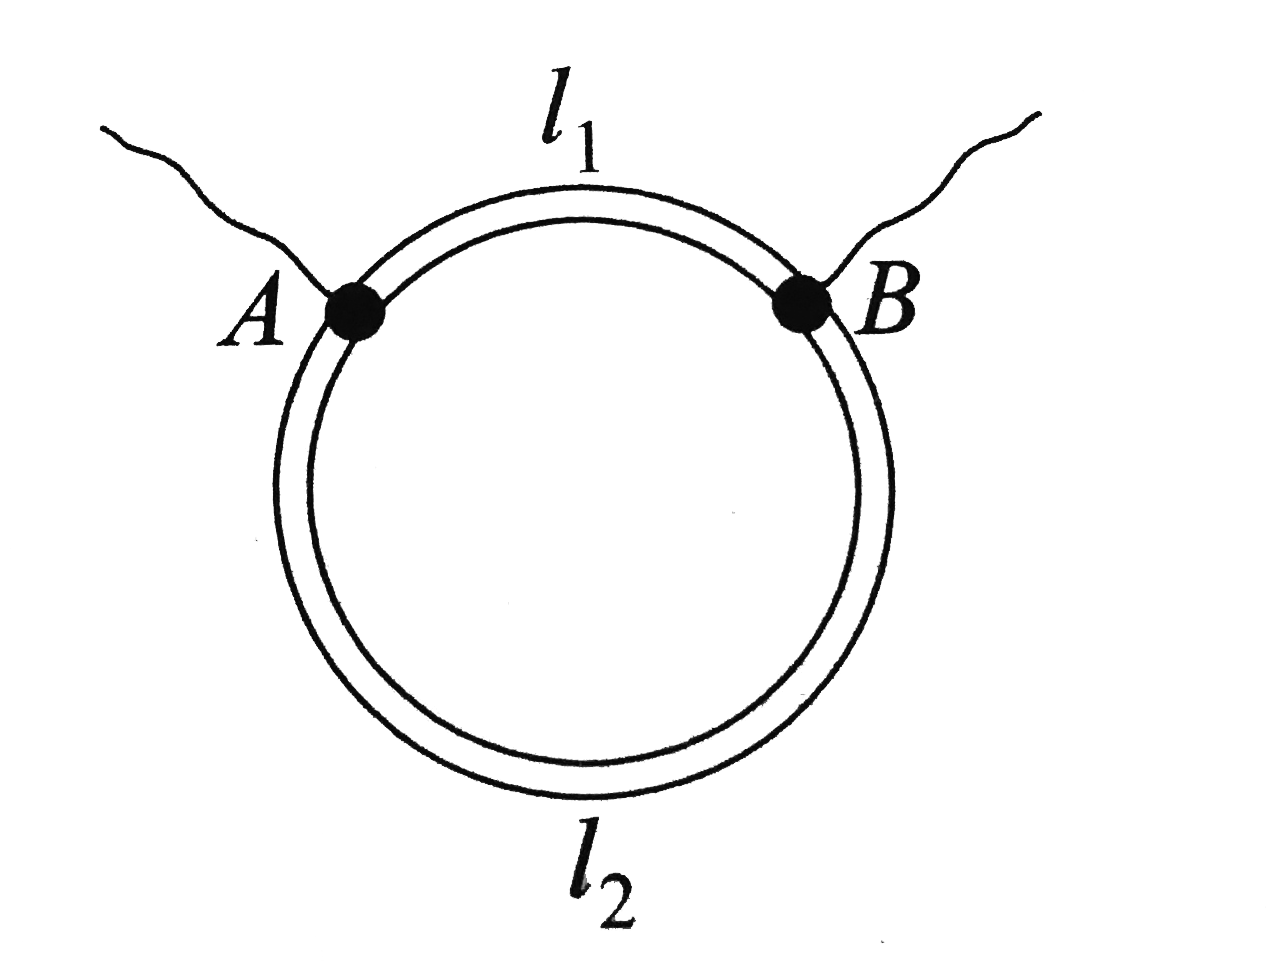 A ring is made of a wire having a resistance R(0) = 12 Omega. Find the point A and B, as shown in the figure, at which a current carrying conductor should be connected so that the resistance R of the subcircuit between these points is equal to (8)/(3) Omega